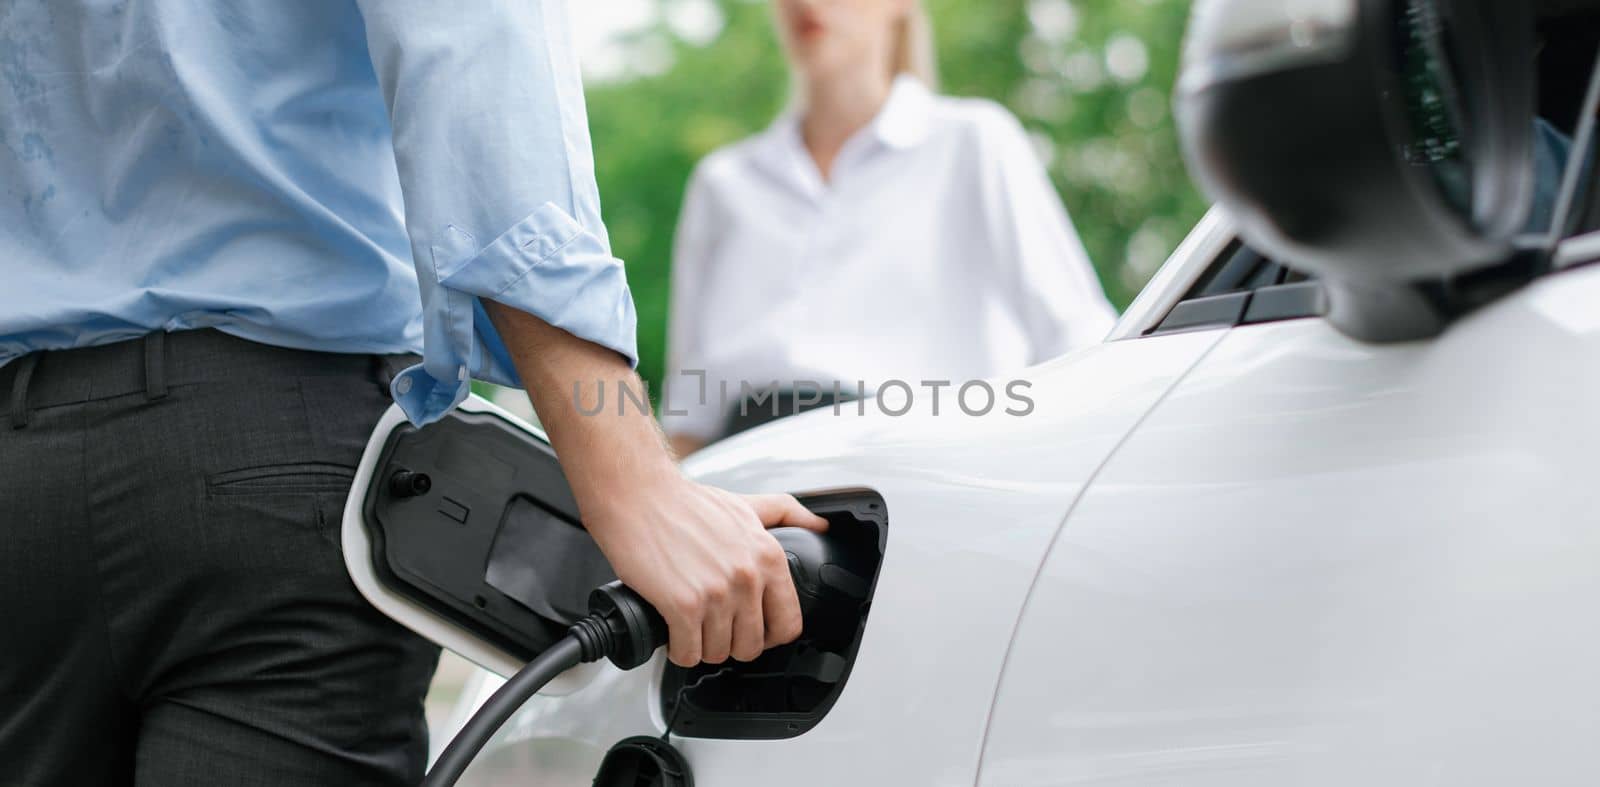 Closeup focus hand insert EV charger to electric vehicle at public charging point in car park with blur business people in backdrop, eco-friendly lifestyle by rechargeable car for progressive concept.